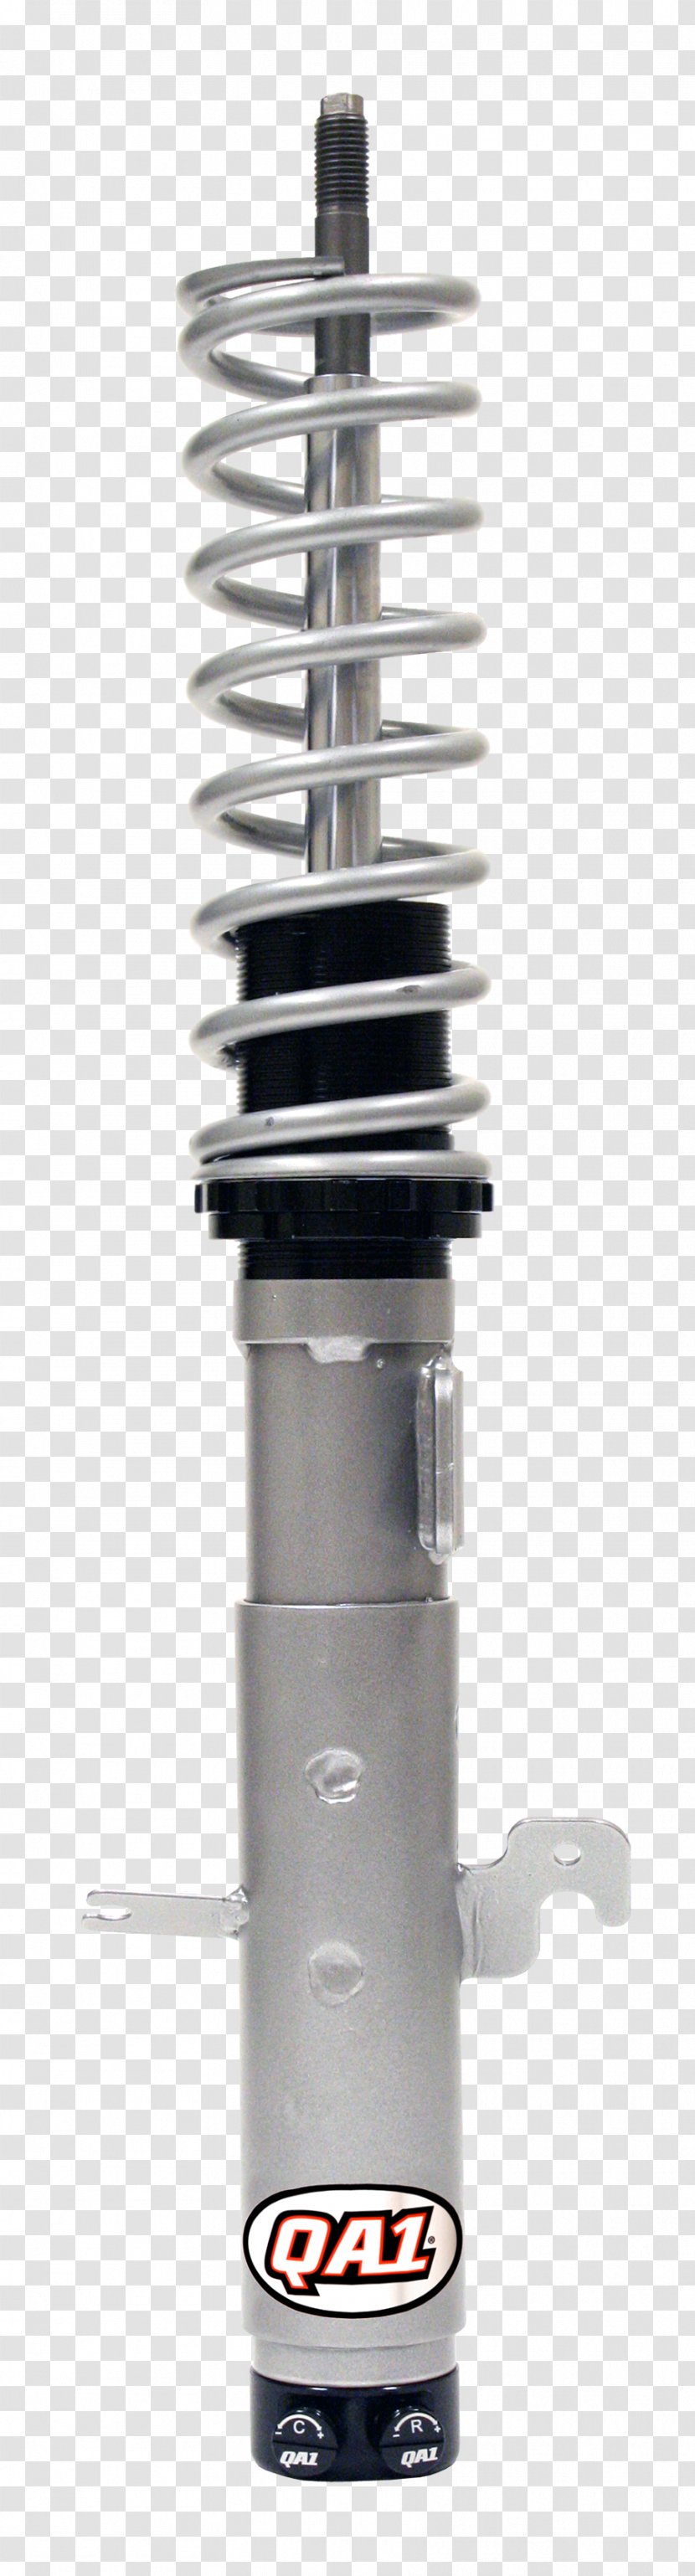 Car Product Design Coilover Strut - Qa1 Precision Products Inc - Spark Plugs Motor Transparent PNG